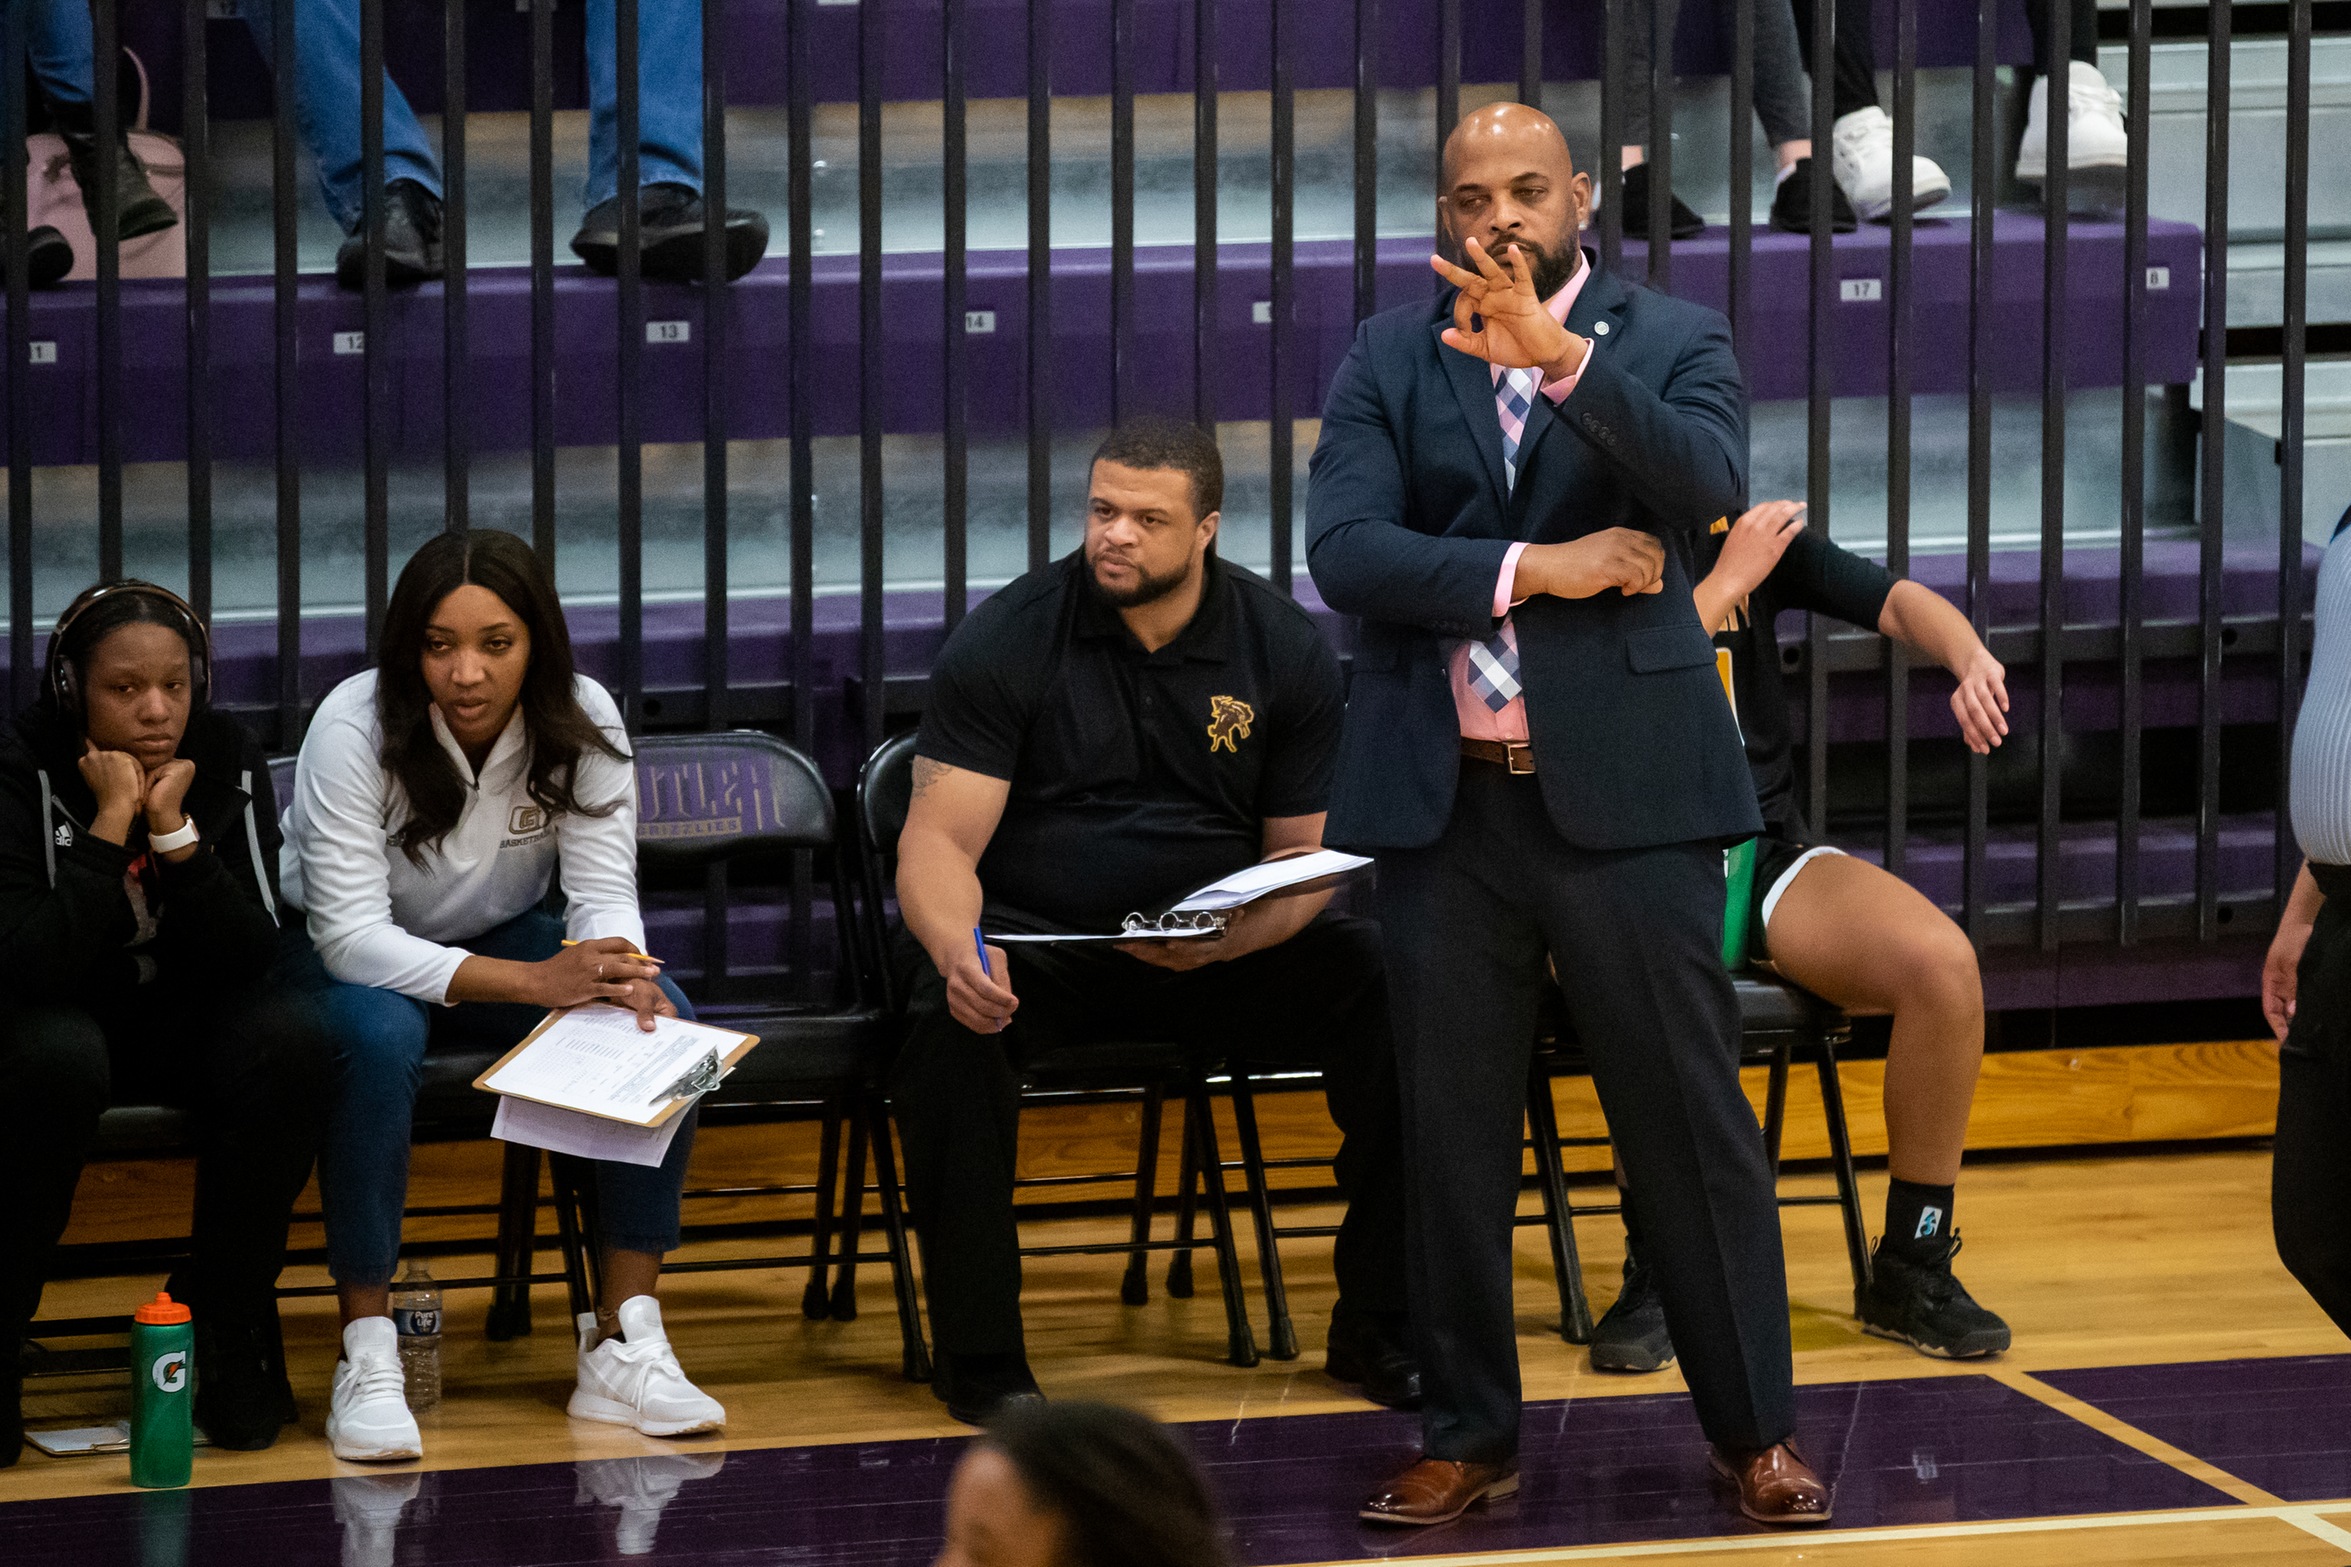 Scales resigns as women's basketball coach